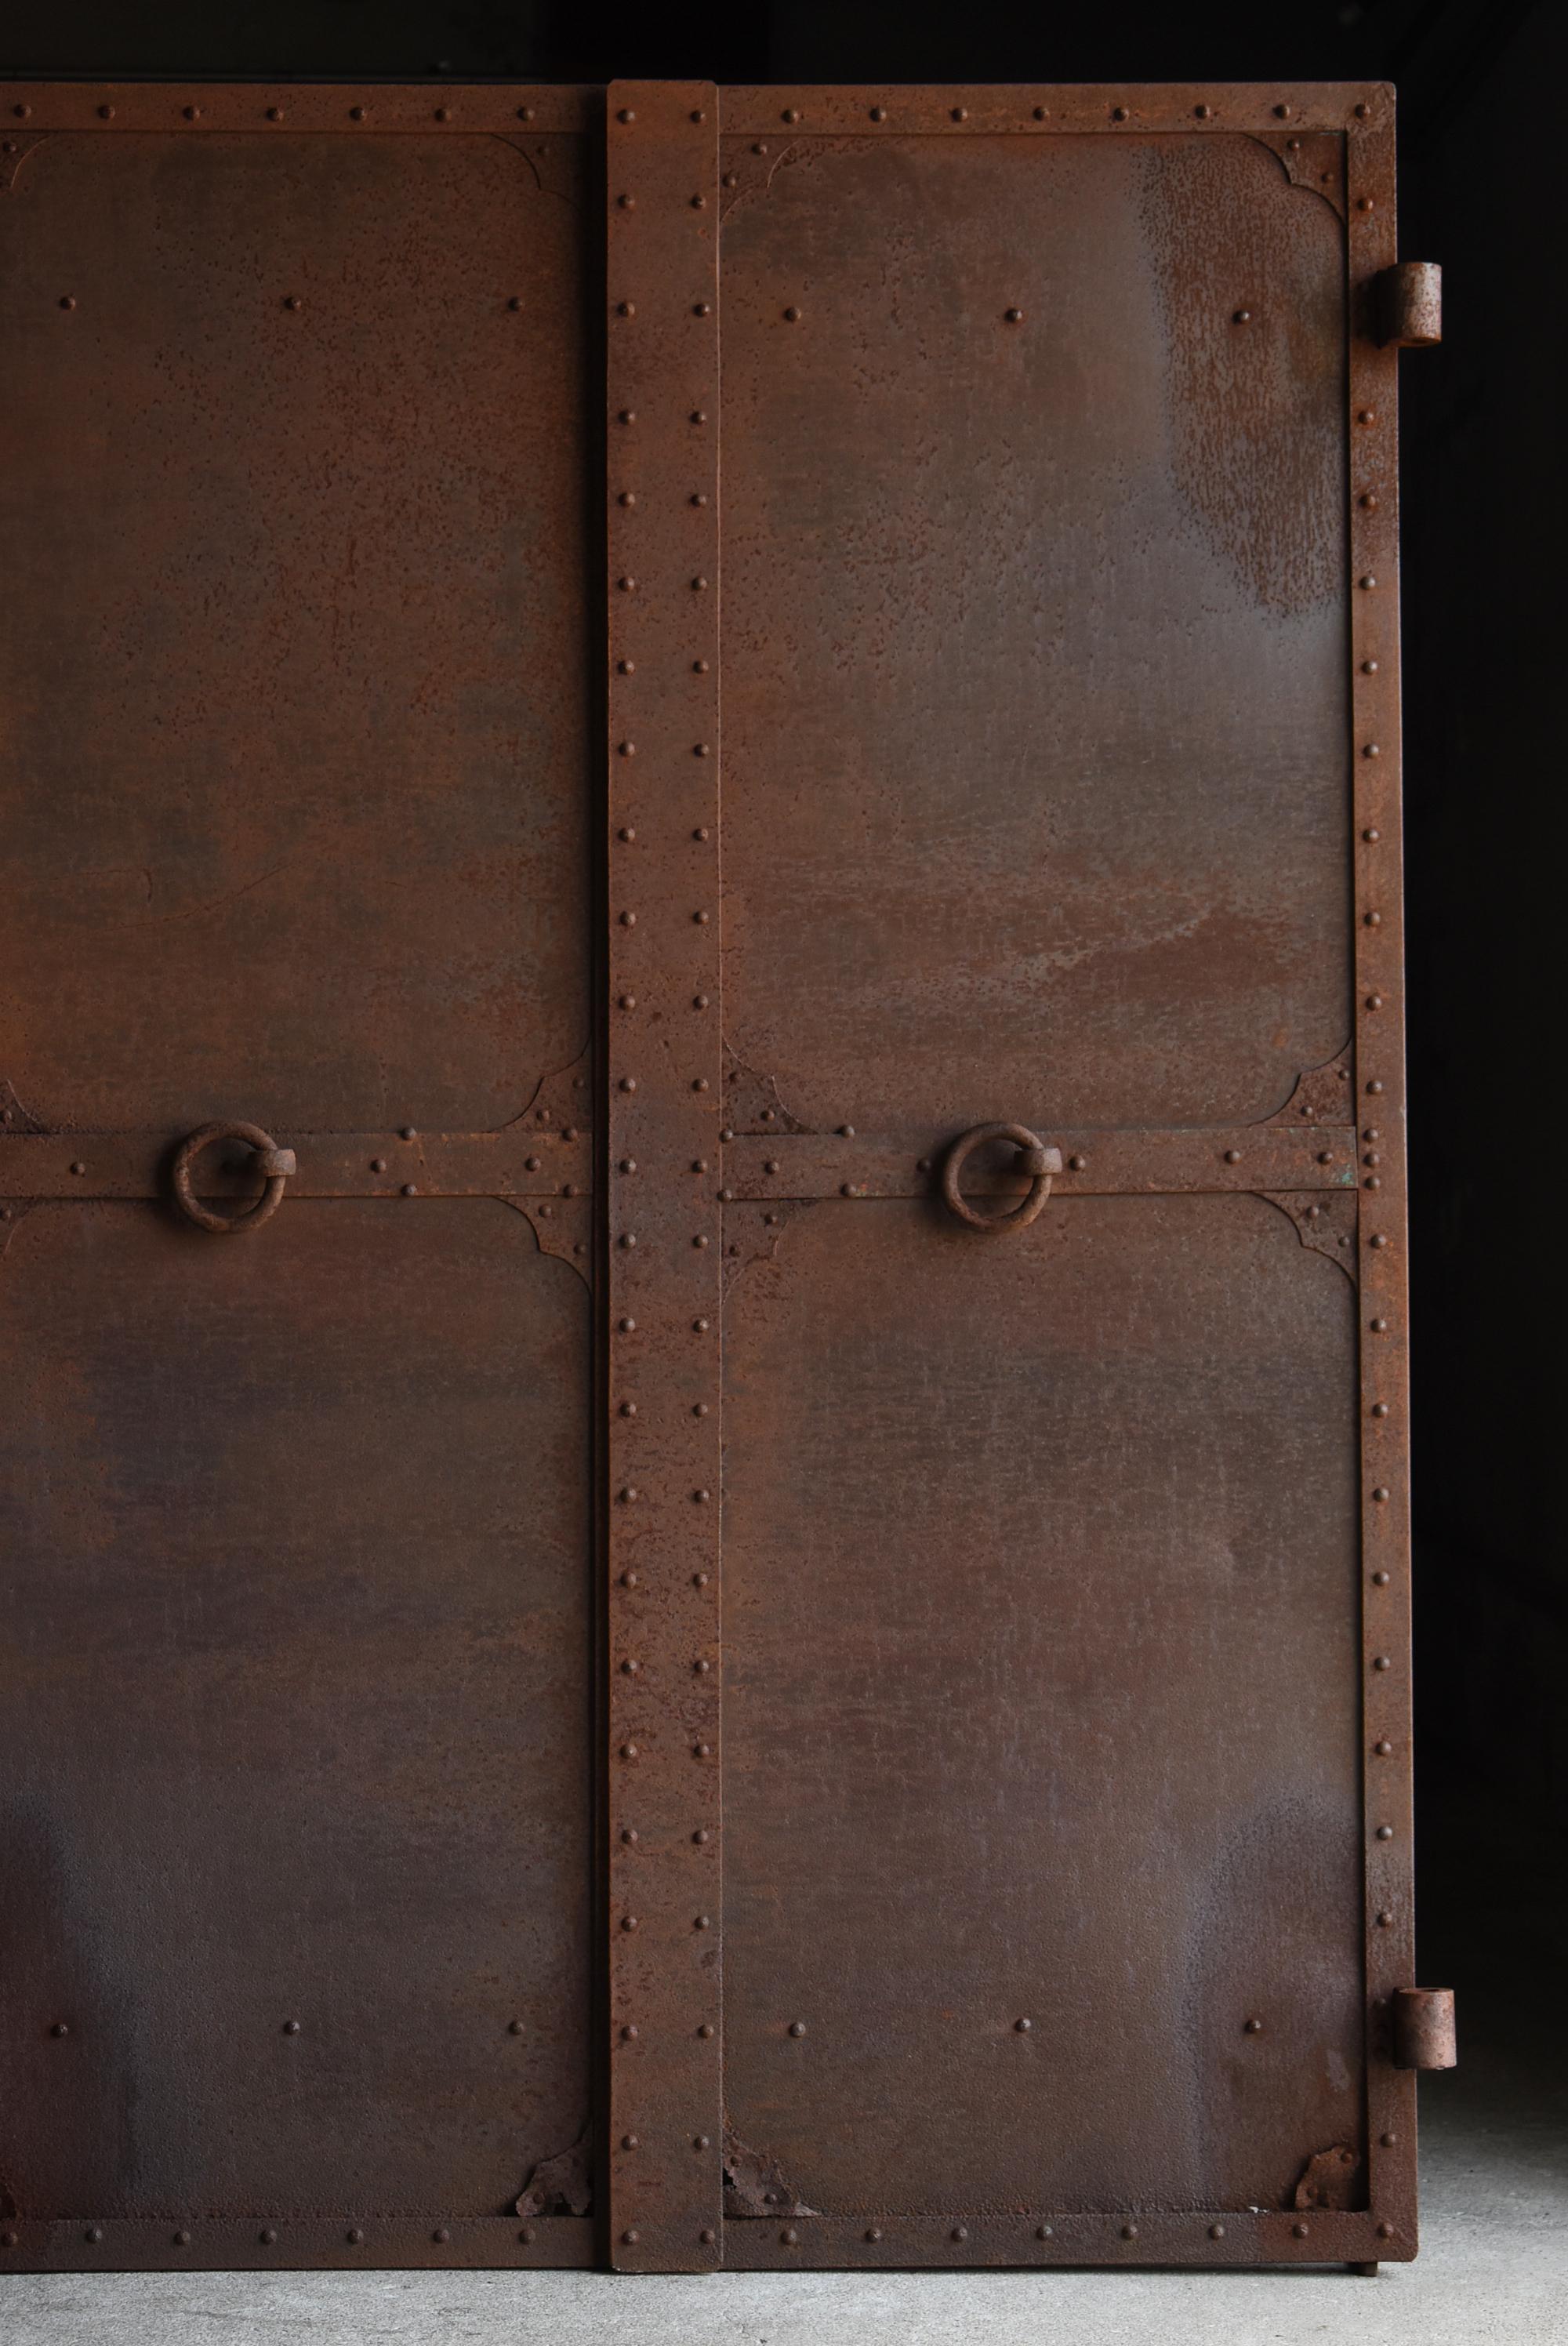 This is a very old Japanese iron double door.
They are from the Meiji period (1860s-1920s).
It is made entirely of iron.

The lean design and ruggedness are beautiful.
You can see the careful work of Japanese craftsmen.

The rusty texture of the